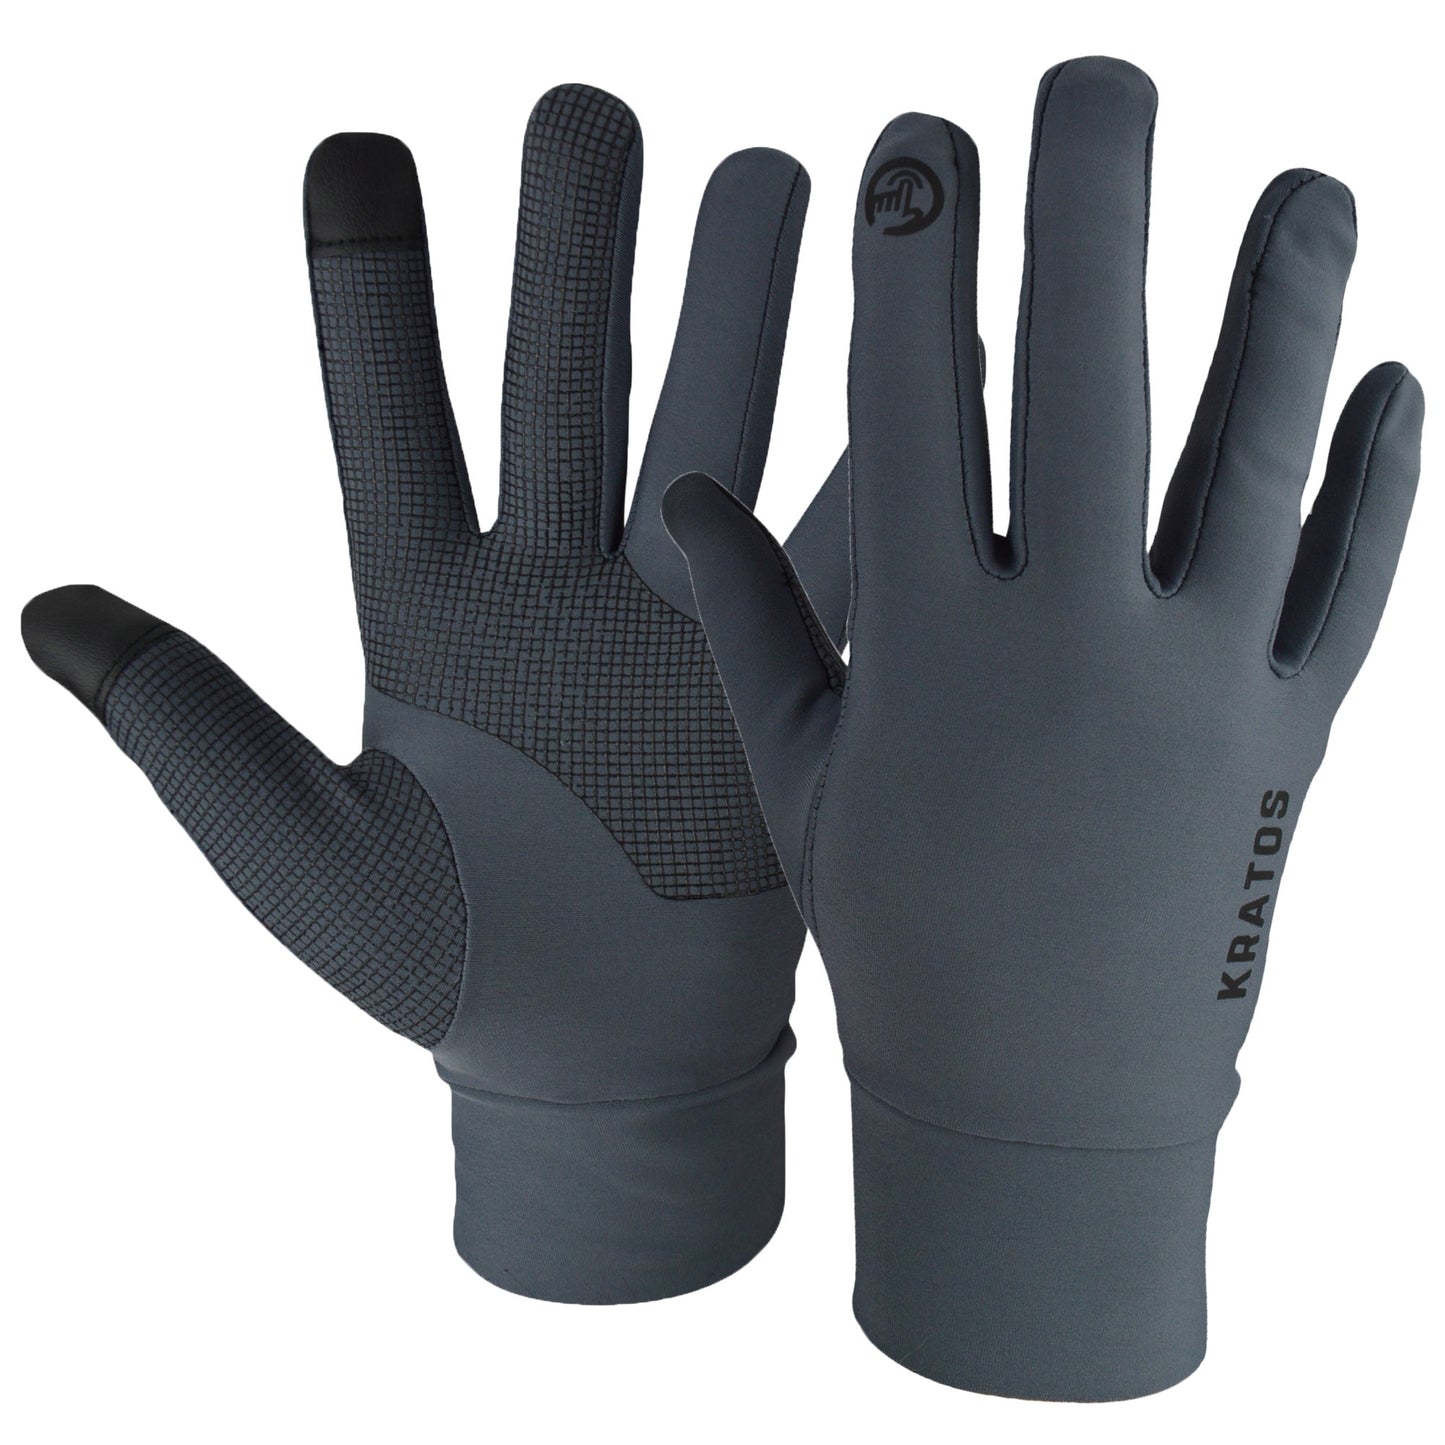 Grey Running Gloves - Unmatched Performance and Comfort